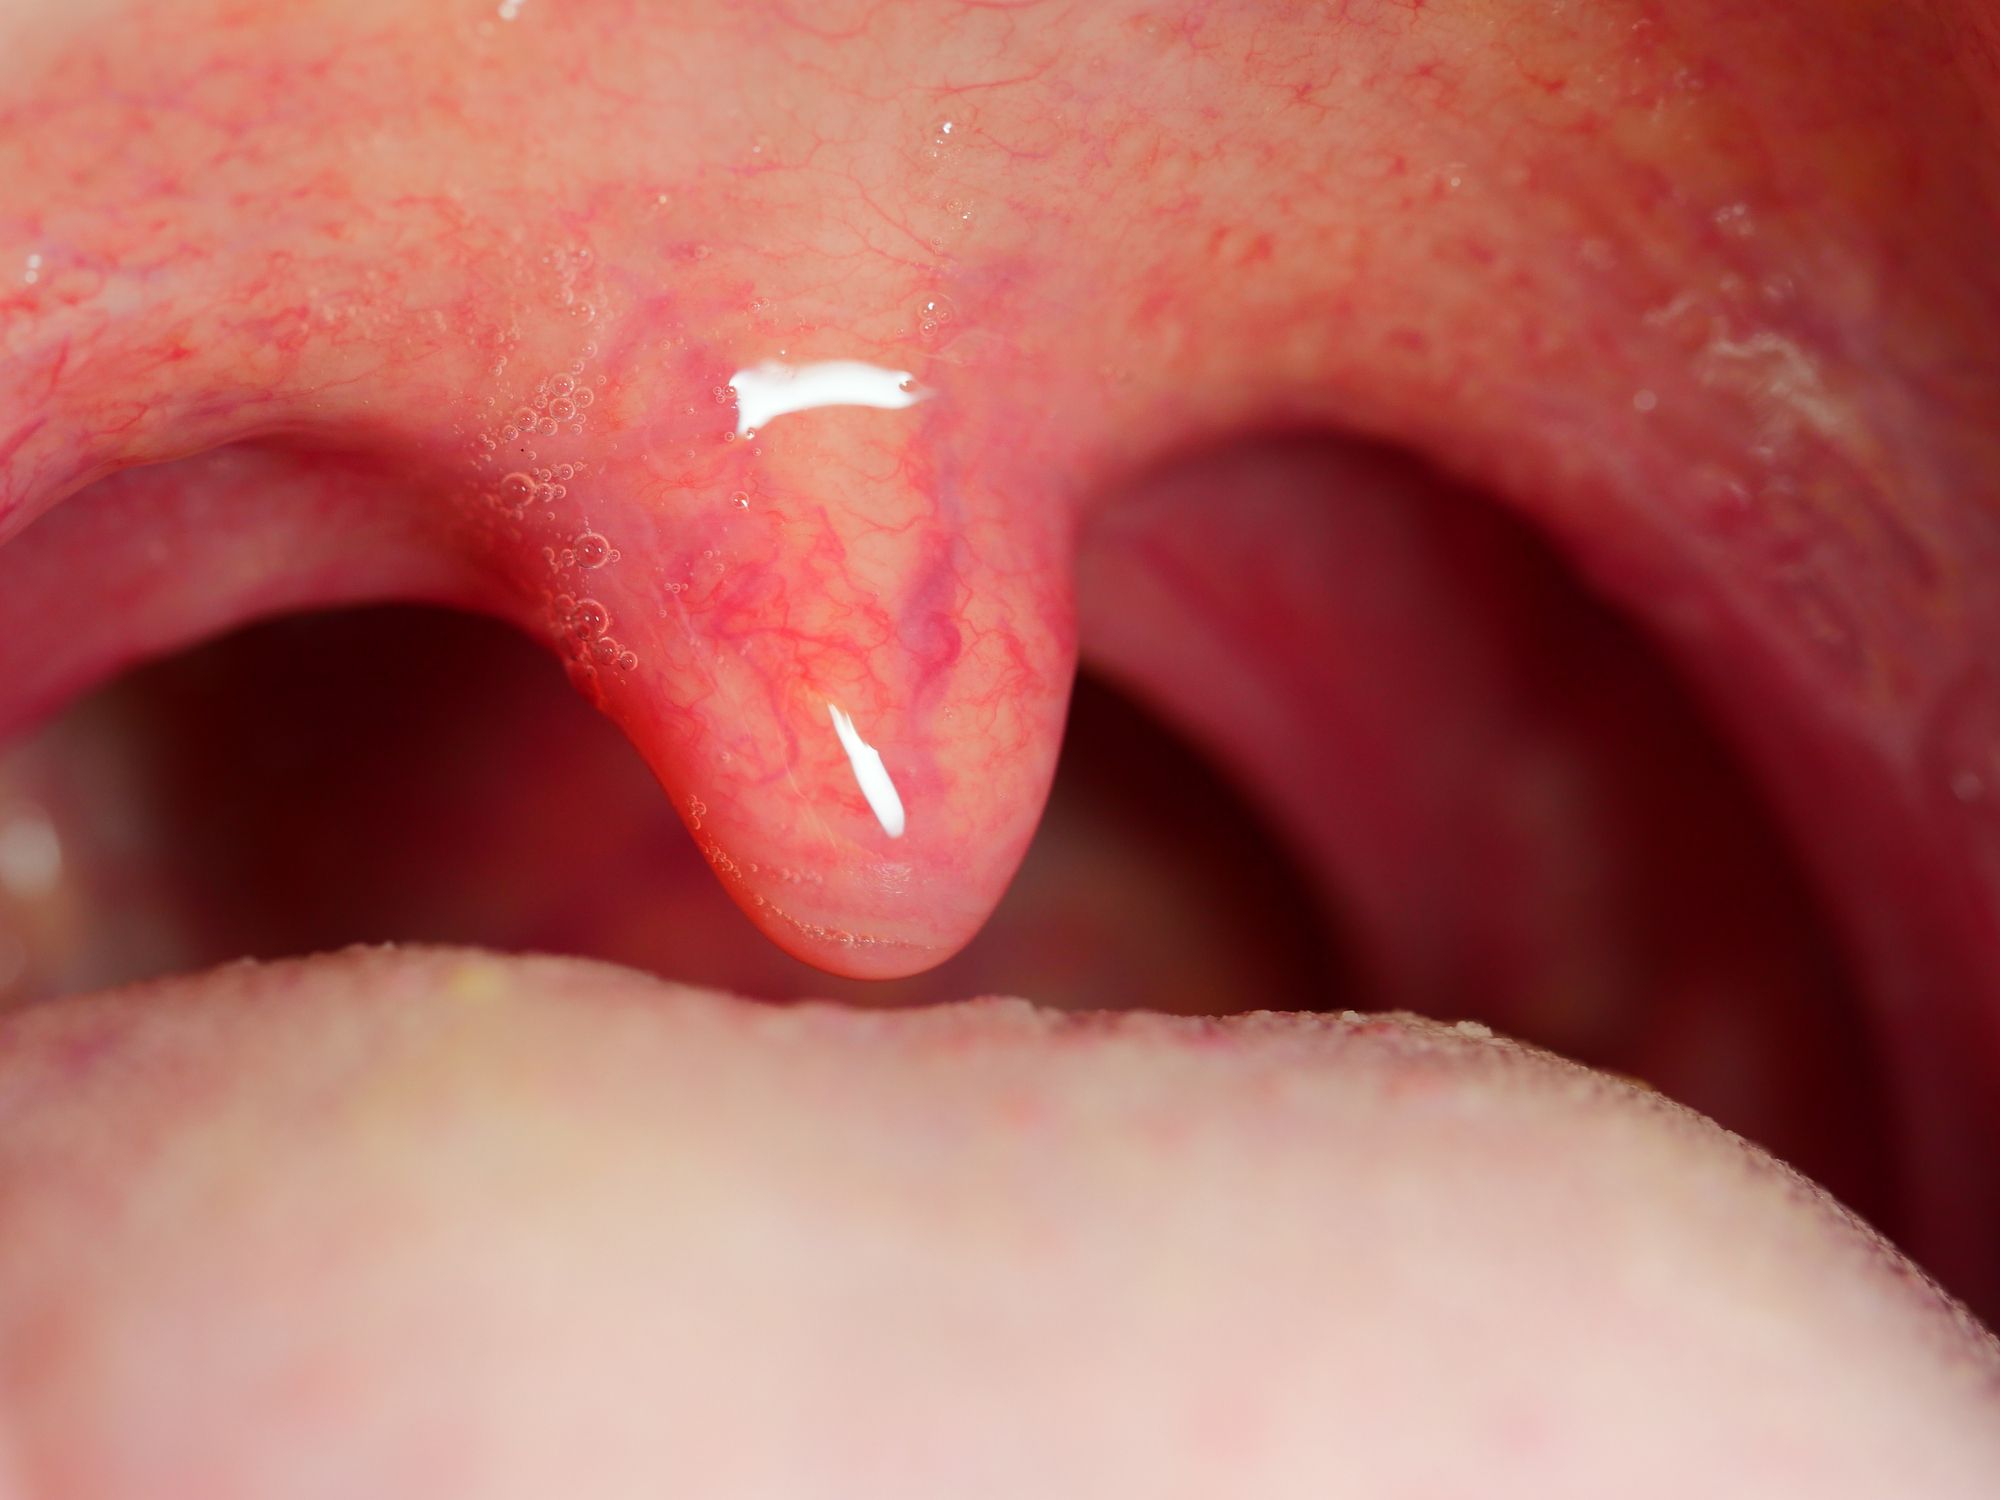 hpv dry mouth